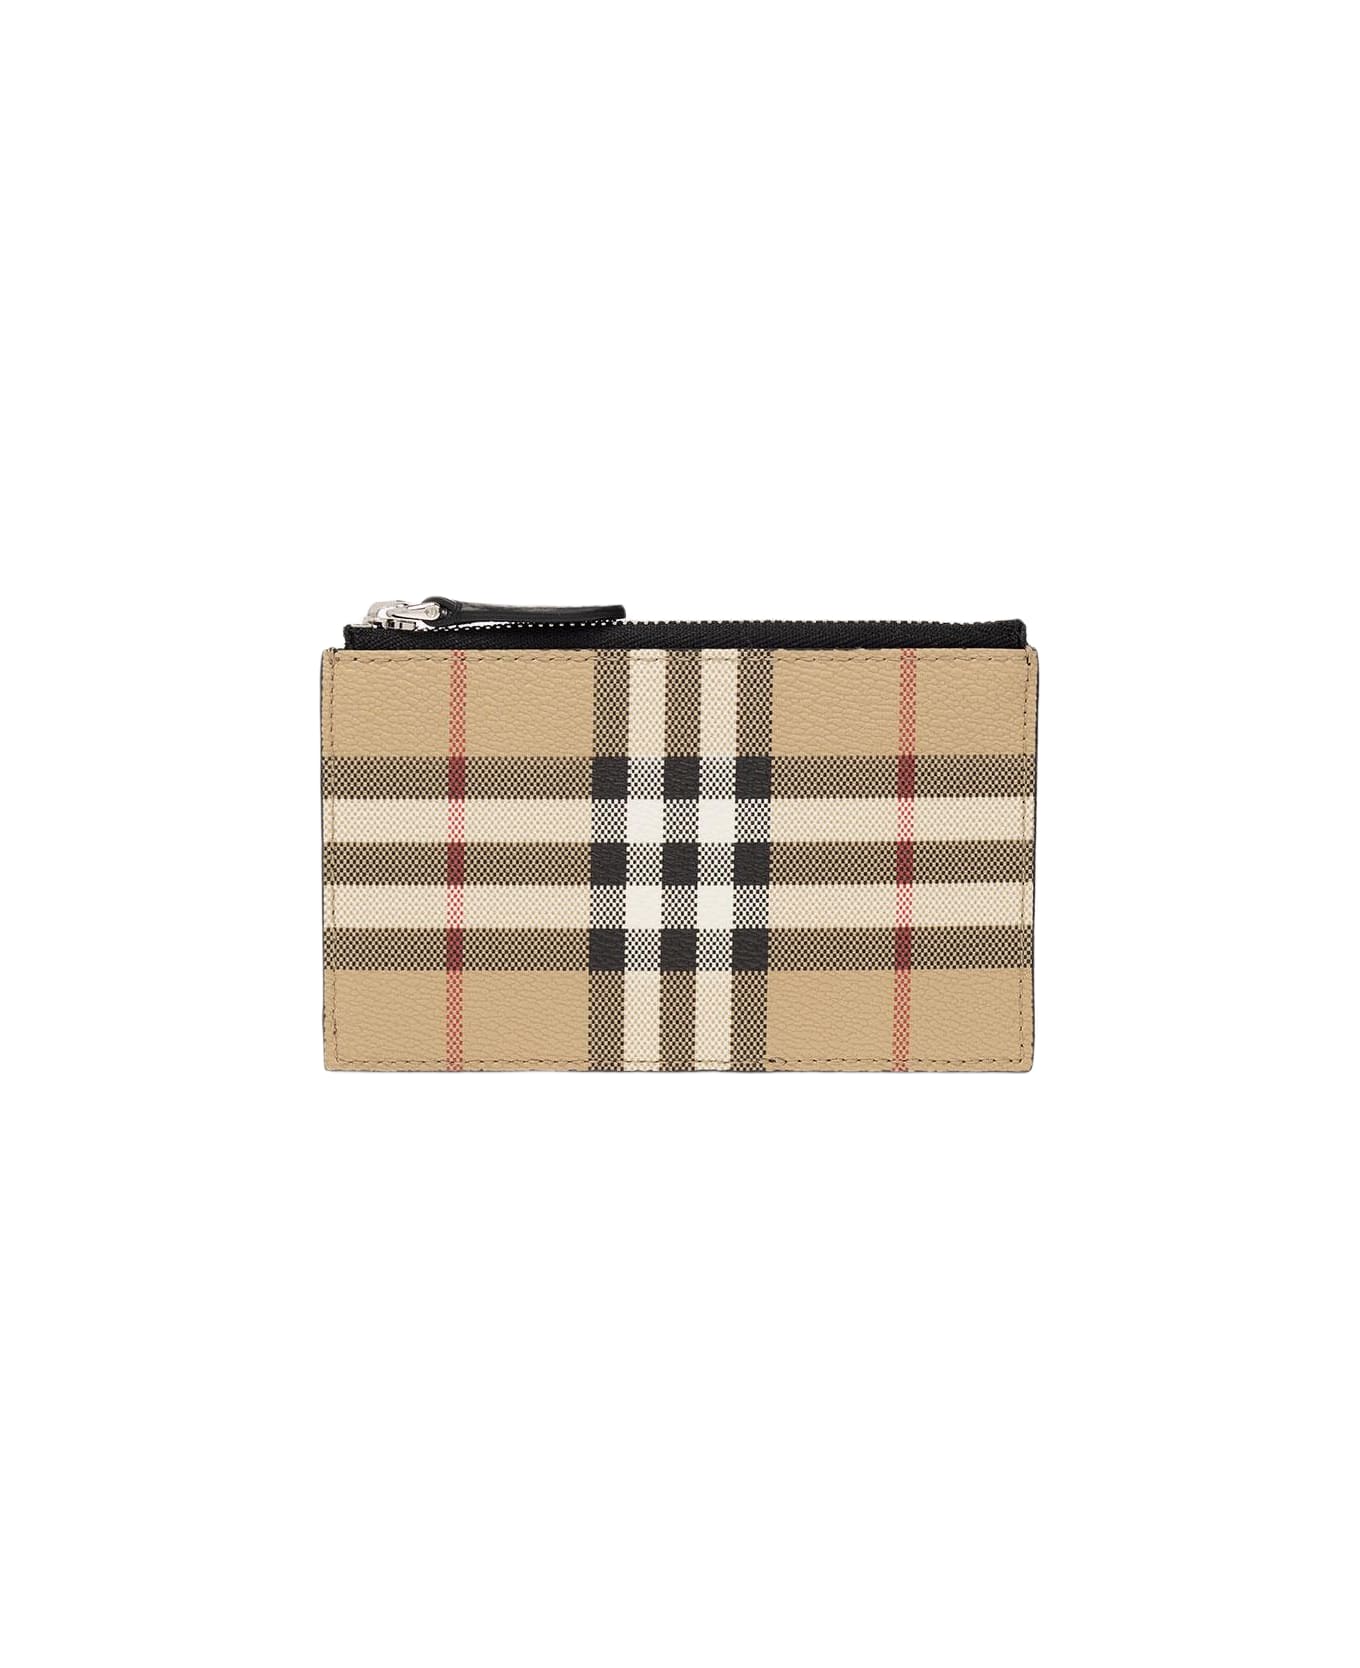 Burberry Card Holder - Archive Beige